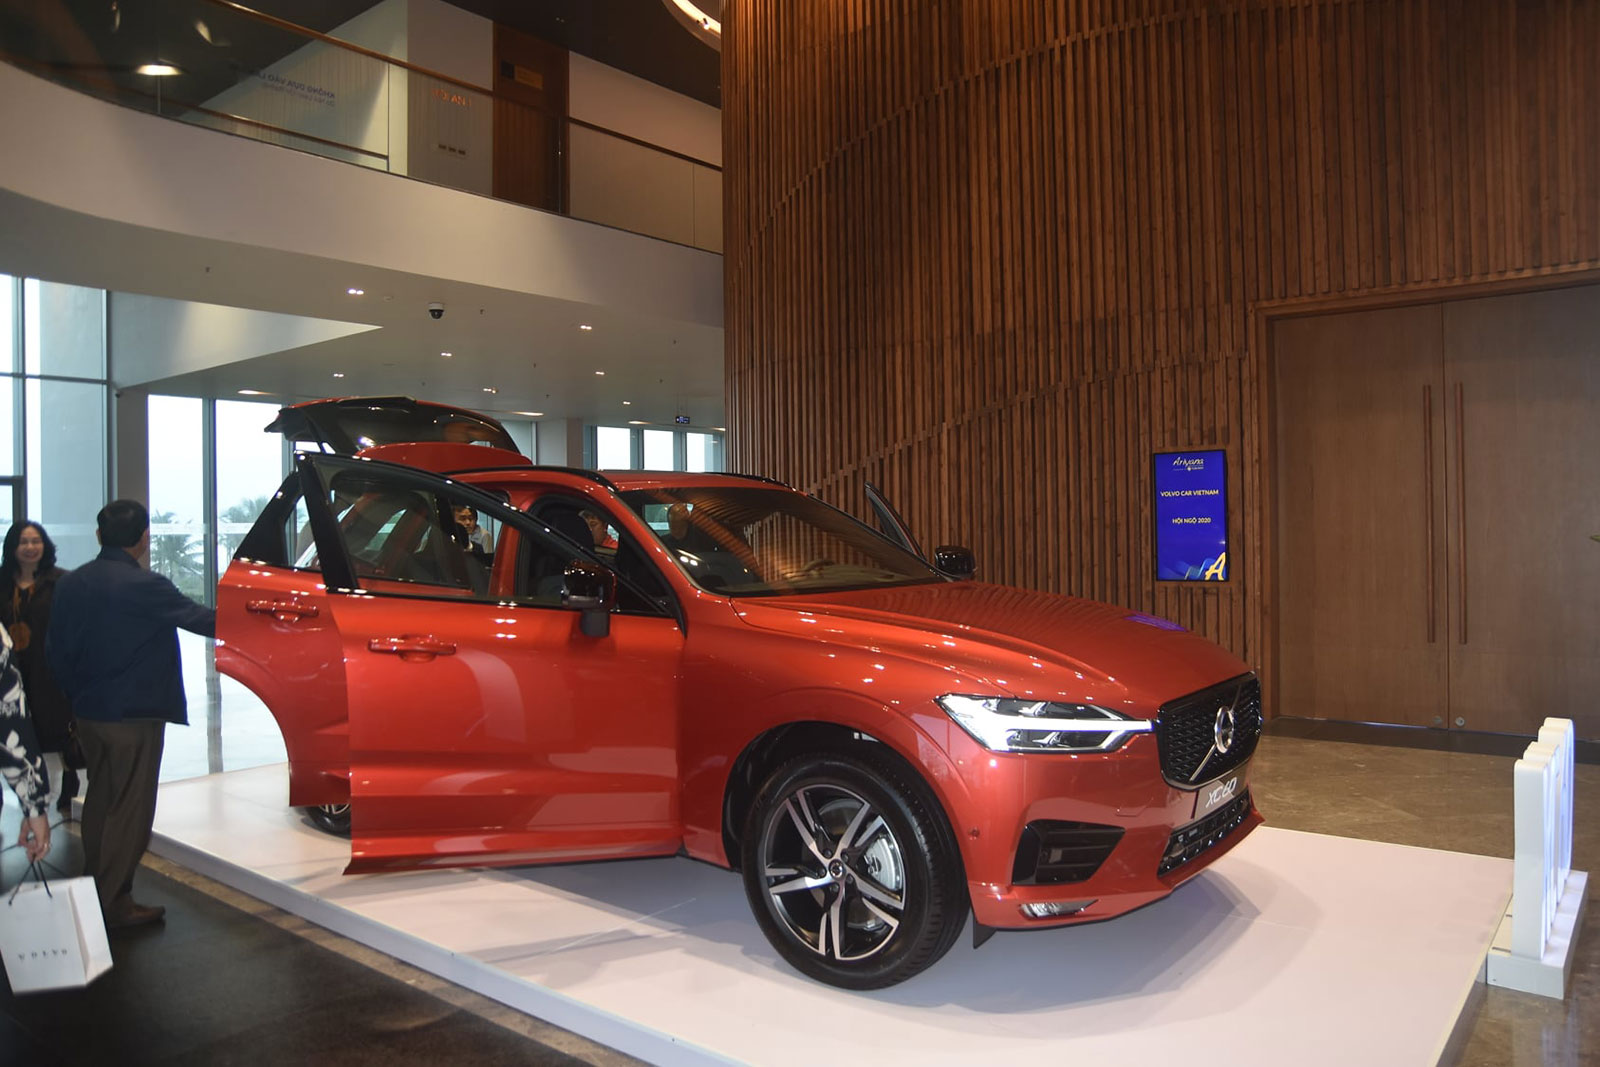 “VOLVO CUSTOMER’S CONFERENCE – LAUNCH SHOWROOM VOLVO DA NANG AND FUND – FOR A BETTER VIETNAM